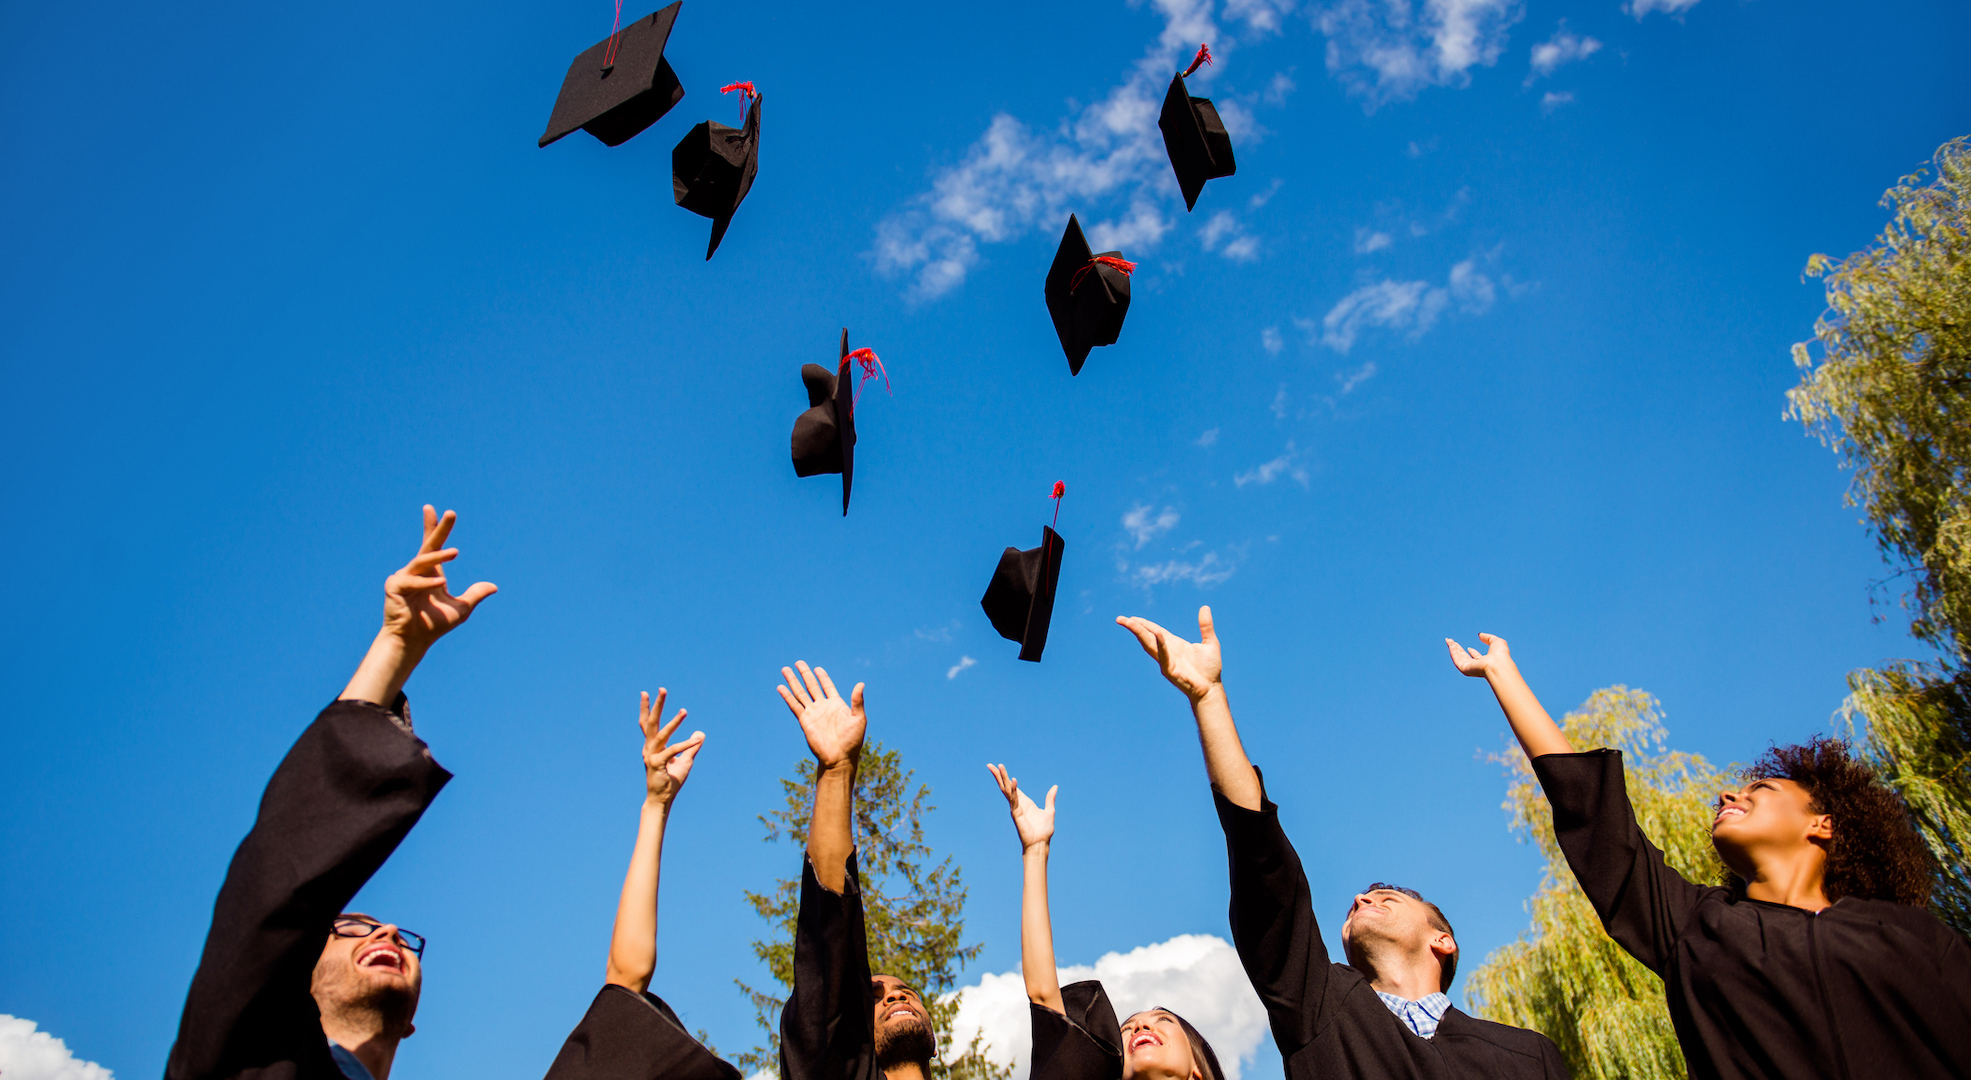 Top tips to make the most of graduation day